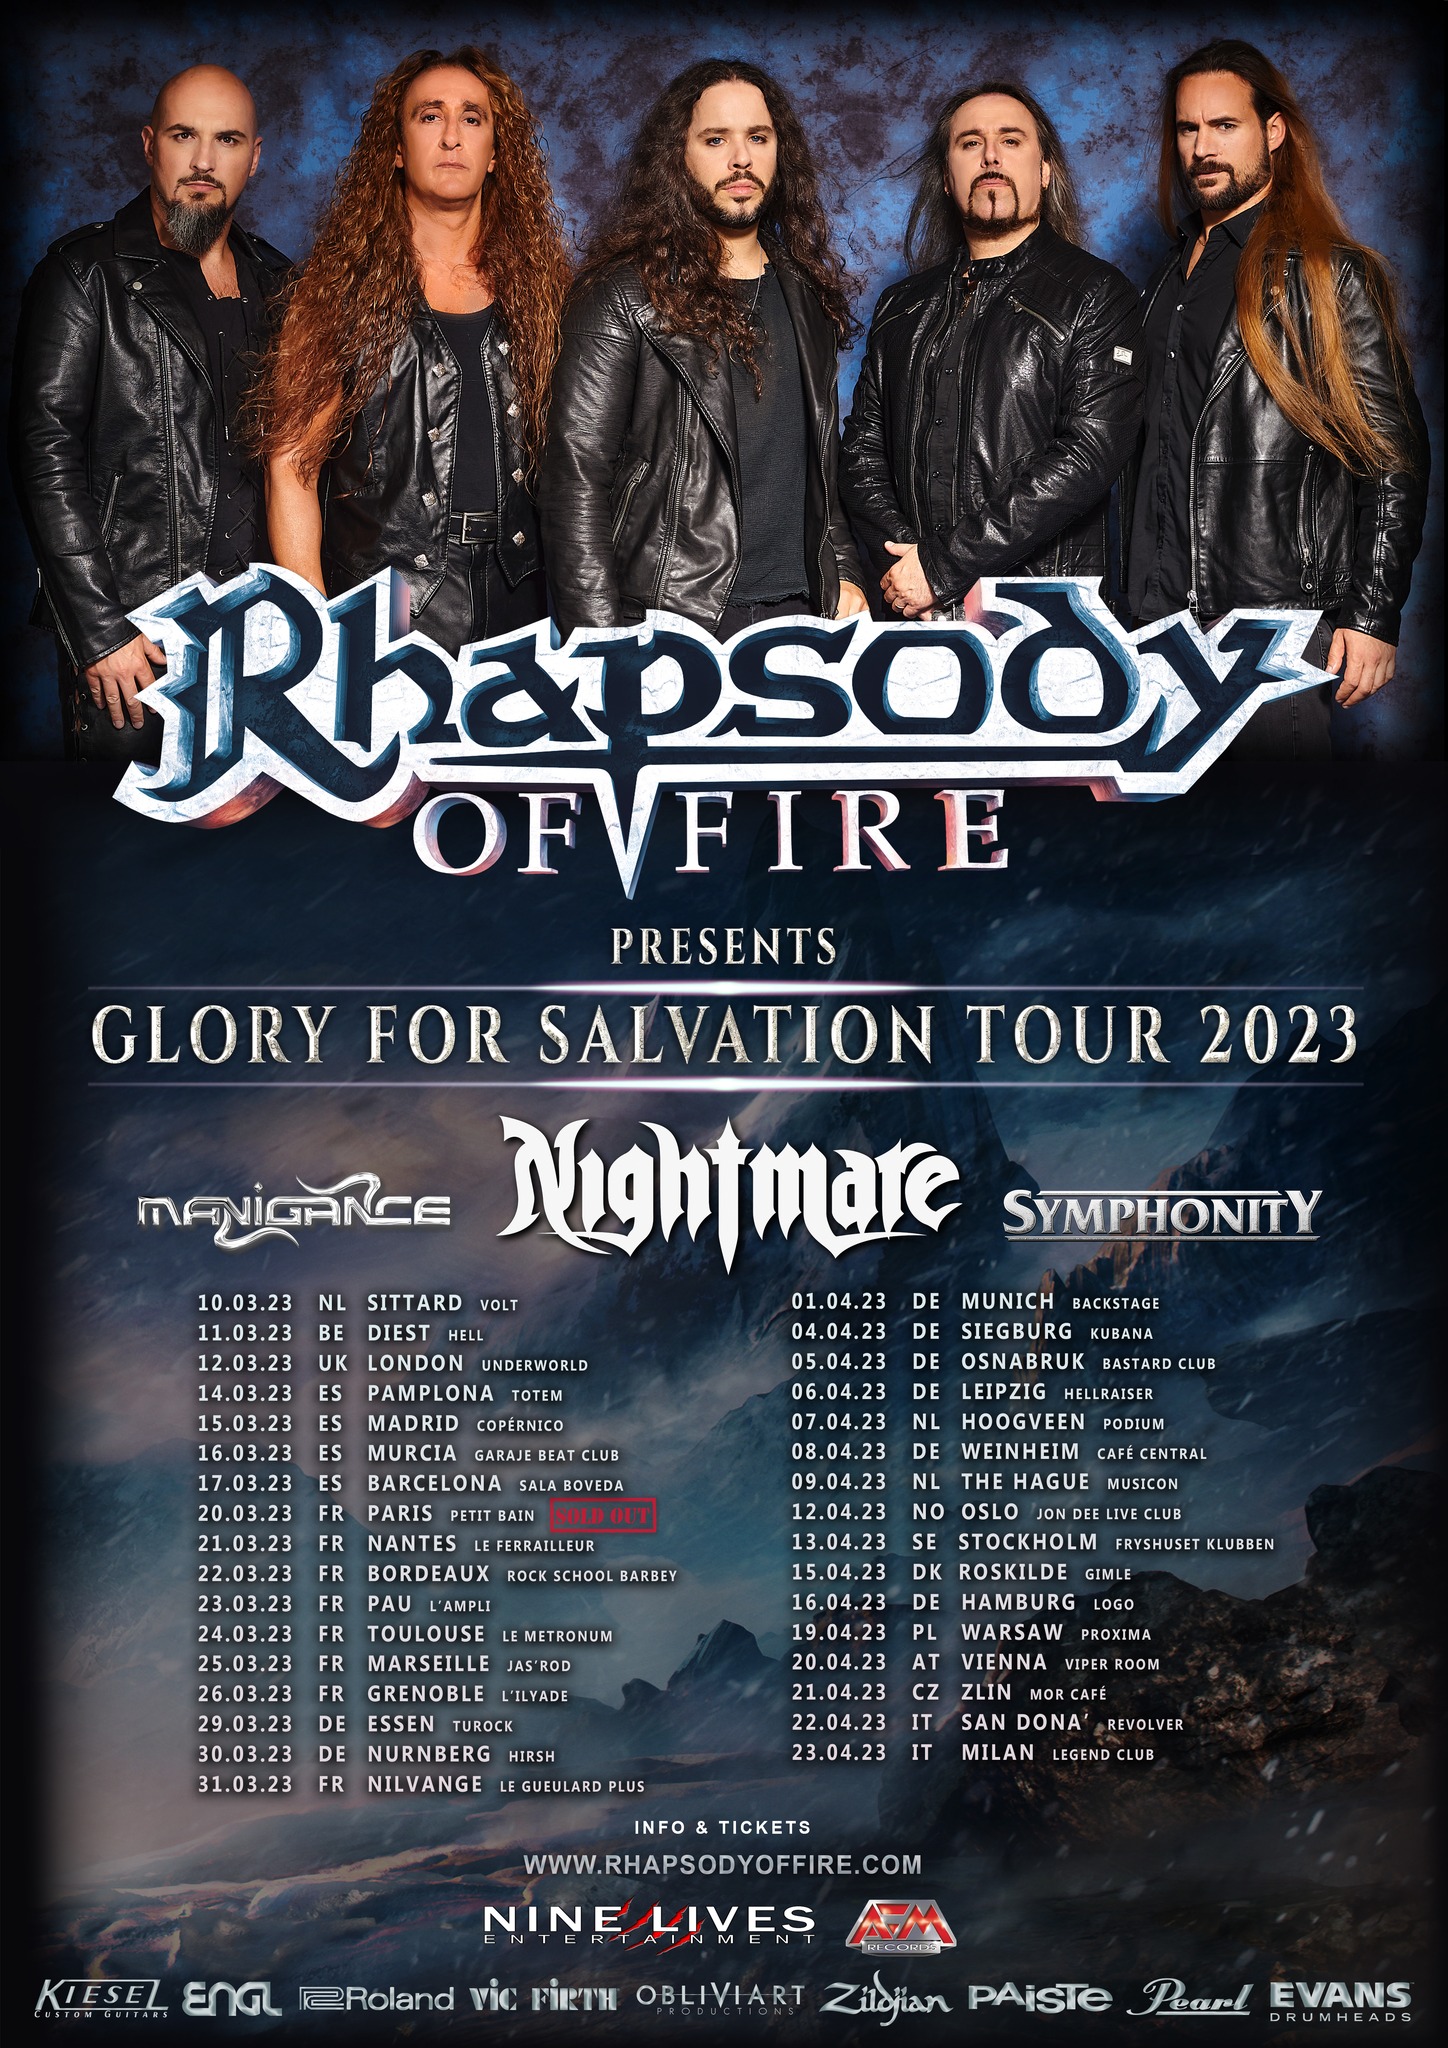 Glory for Salvation Tour 2023